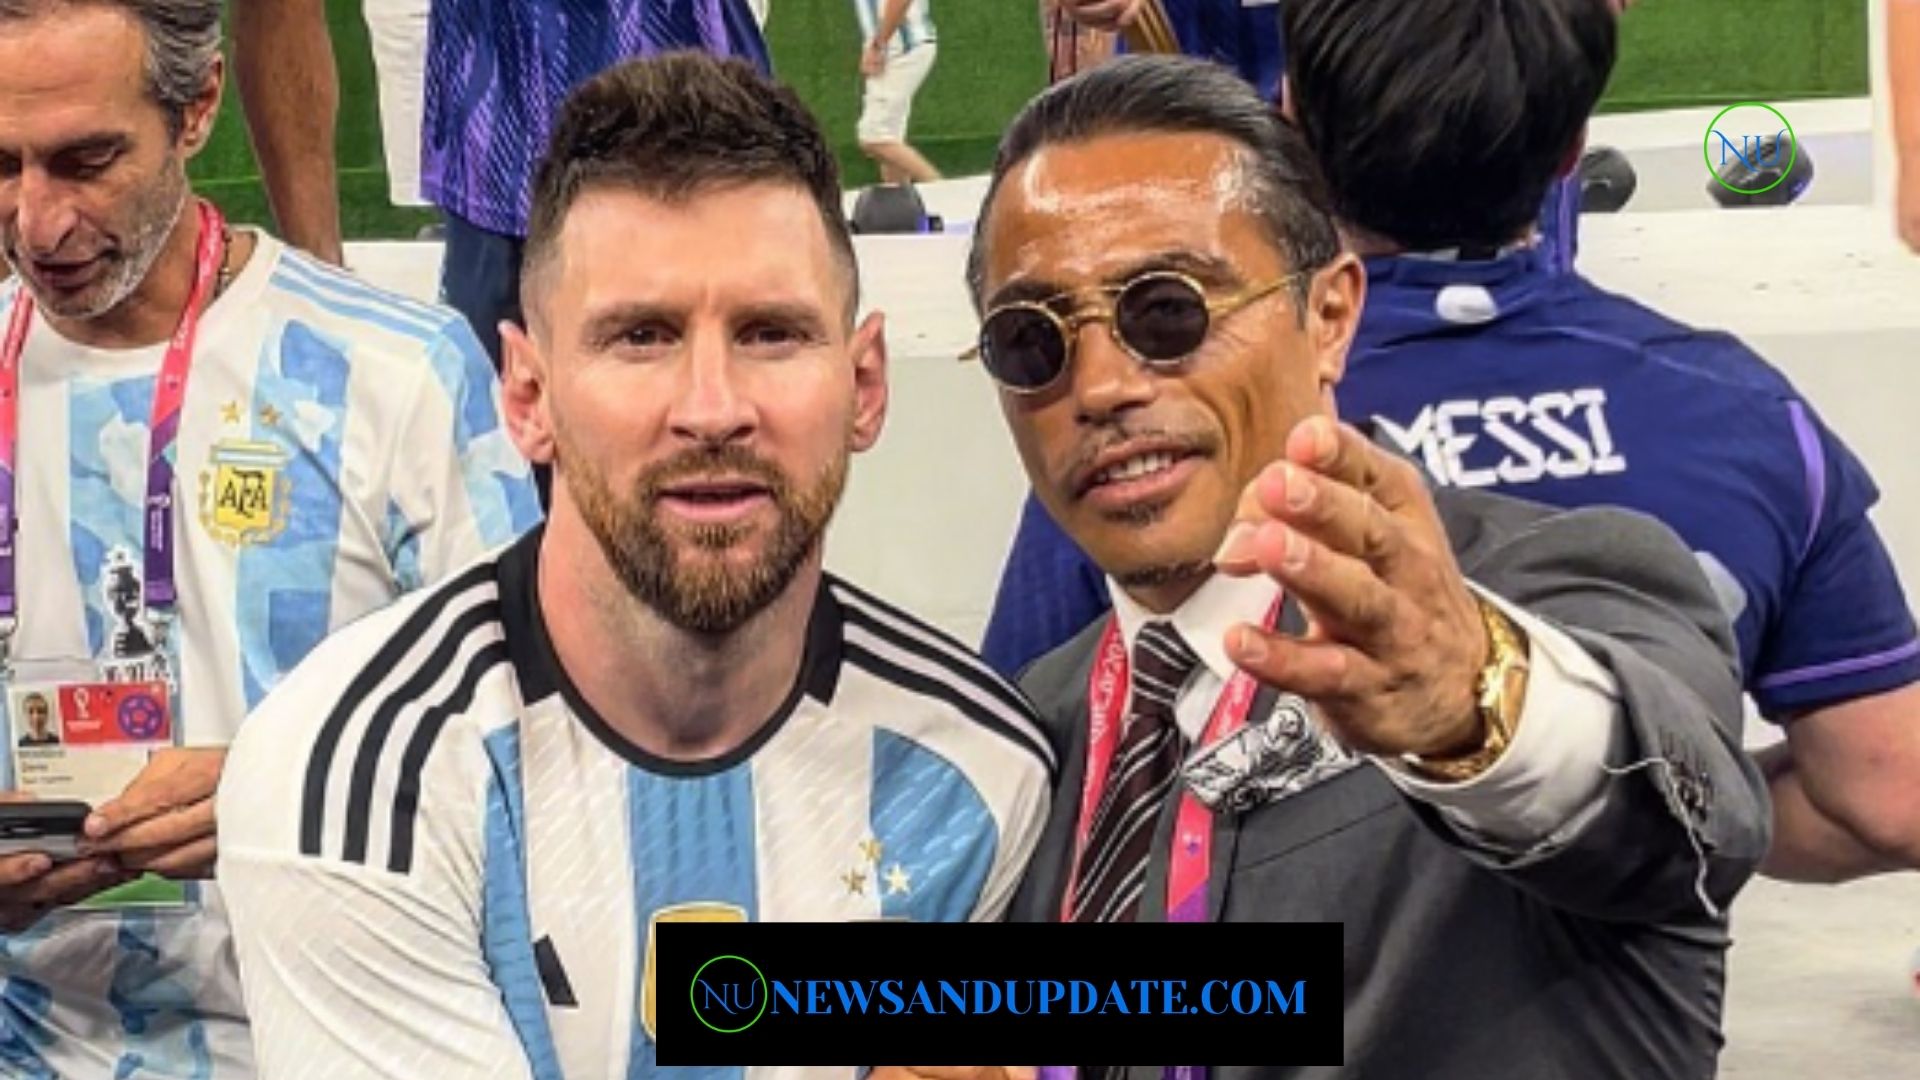 Know About Salt Bae And His Net Worth: Why Was He Ignored By Messi?